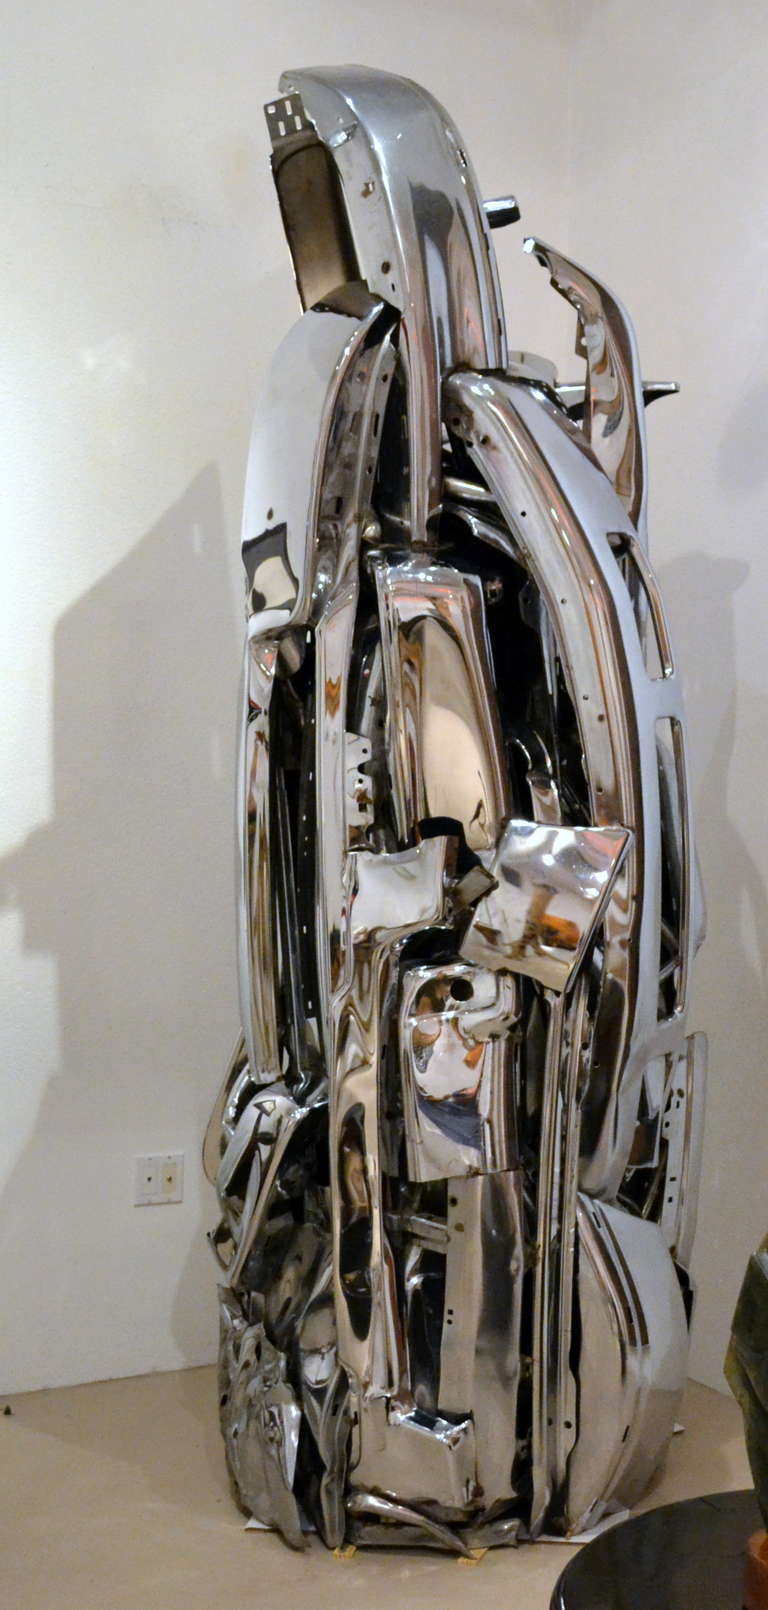 One would think this work by Paulden Evans might be a John Chamberlain sculpture.  However, like Chamberlain, who almost single highhandedly gave automotive metal a place in the history of sculpture, Evans' creations remind you that the material